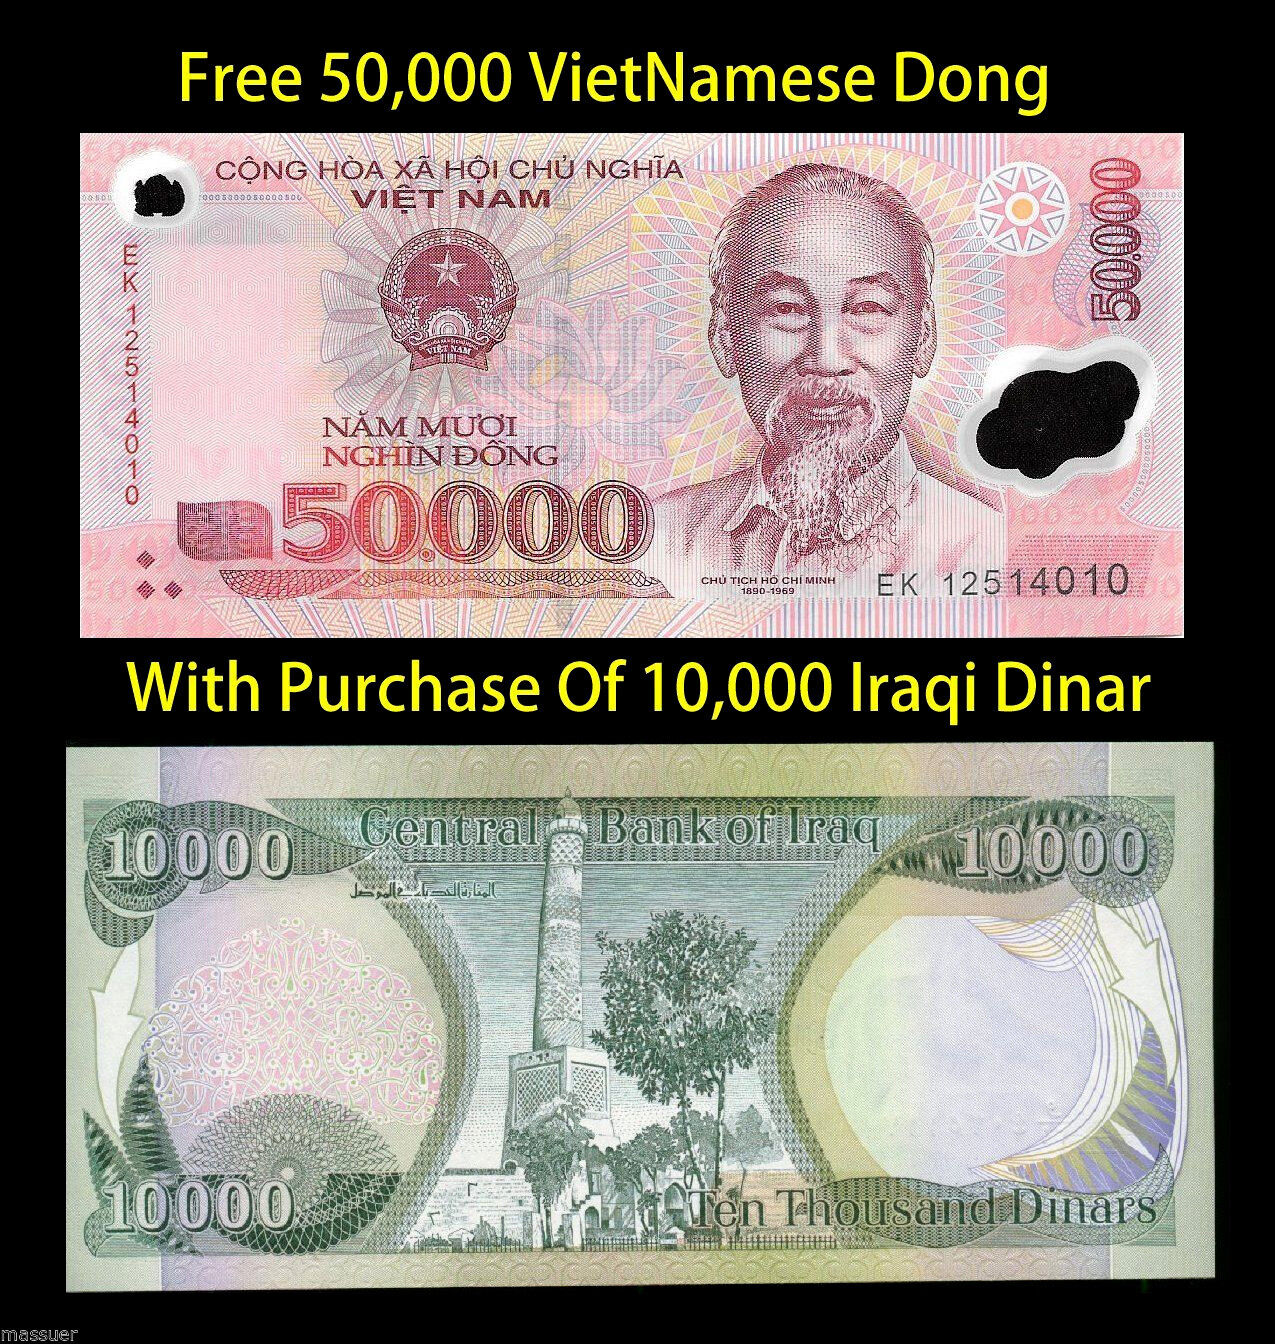 Free 50,000 Vietnam Dong With Purchase Of 10,000 New Iraqi Dinar